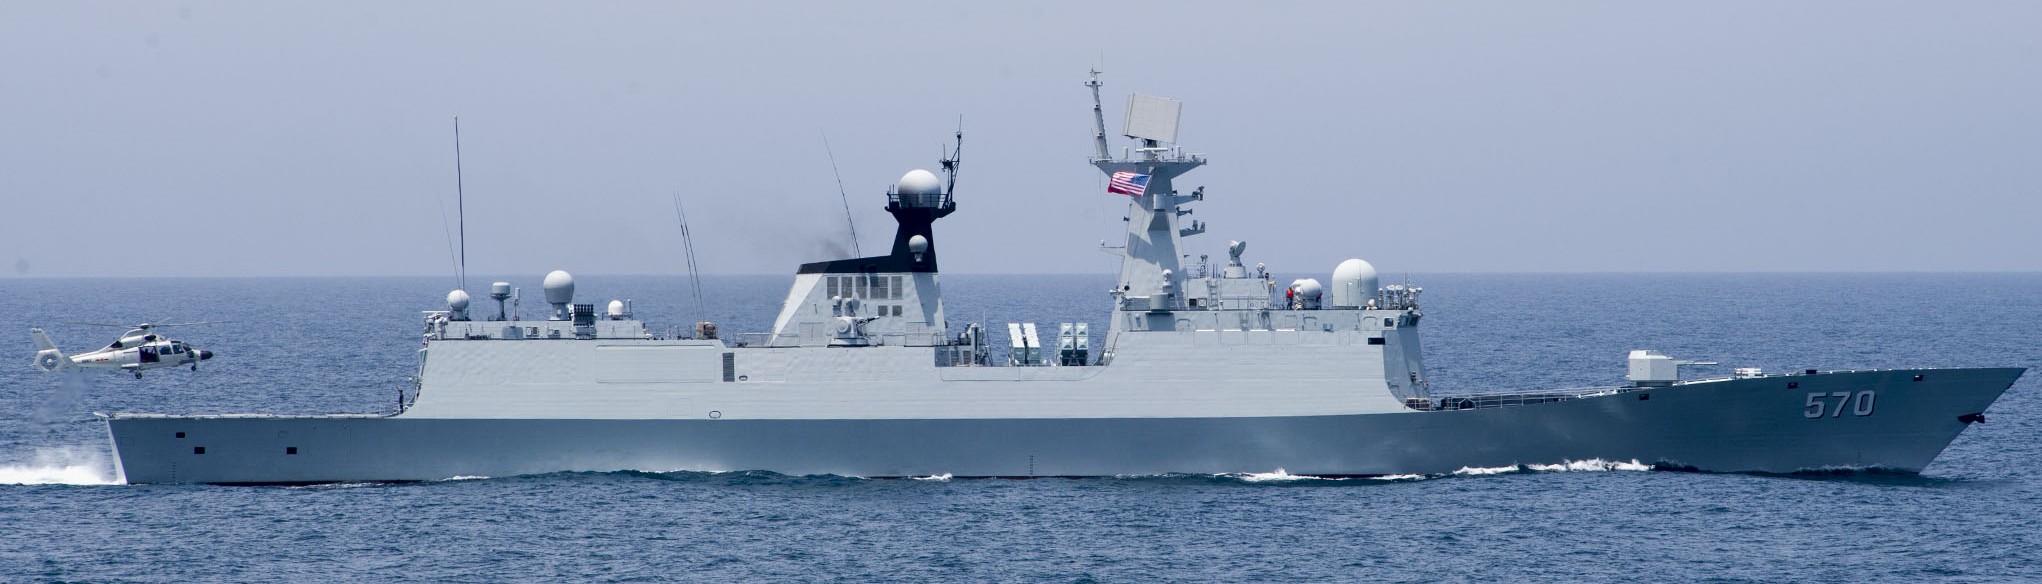 ffg-570 plans huangshan type 054a jiangkai ii class guided missile frigate china people's liberation army navy 02